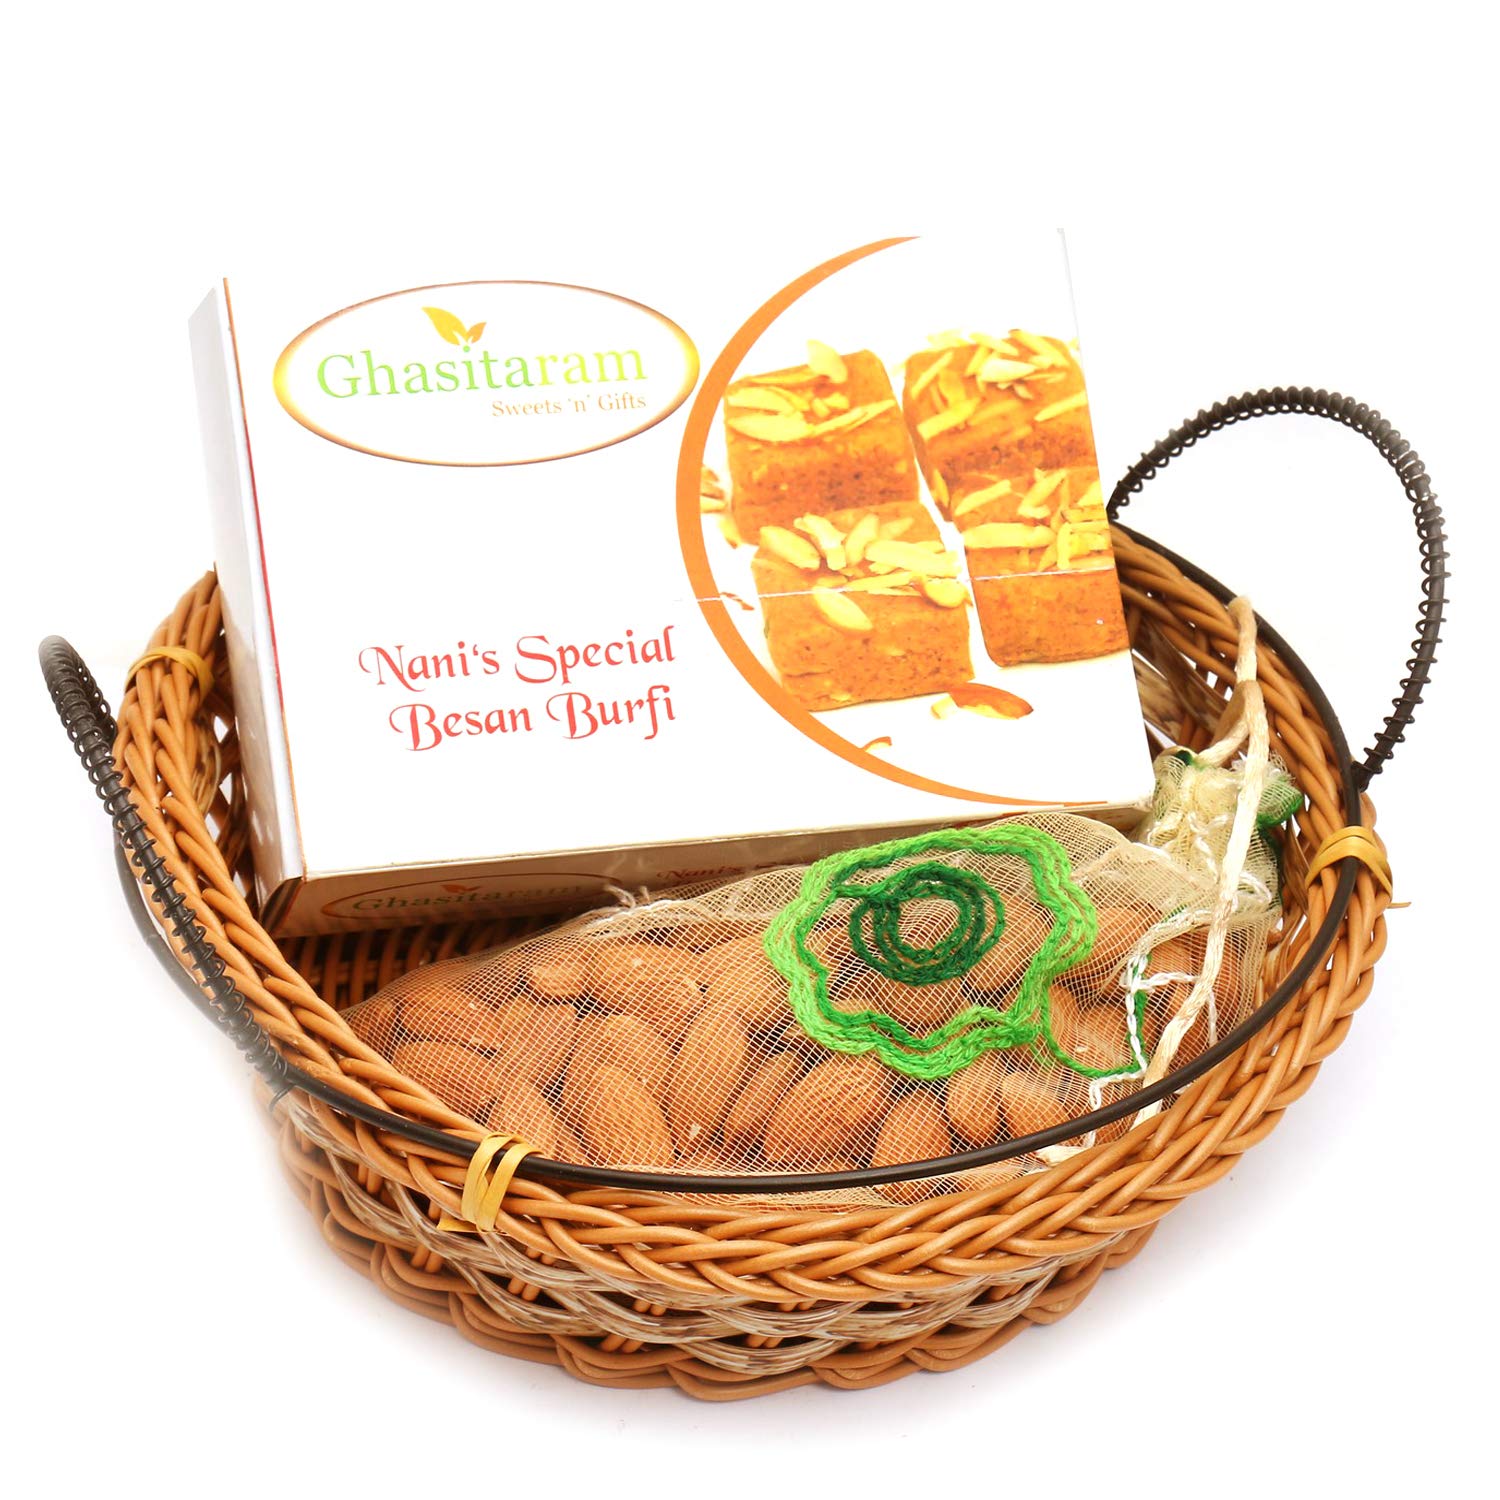 Ghasitaram Gifts Mithai Hampers - Small Cane Basket with Nani's Spl Besan Barfi and Almonds Pouch